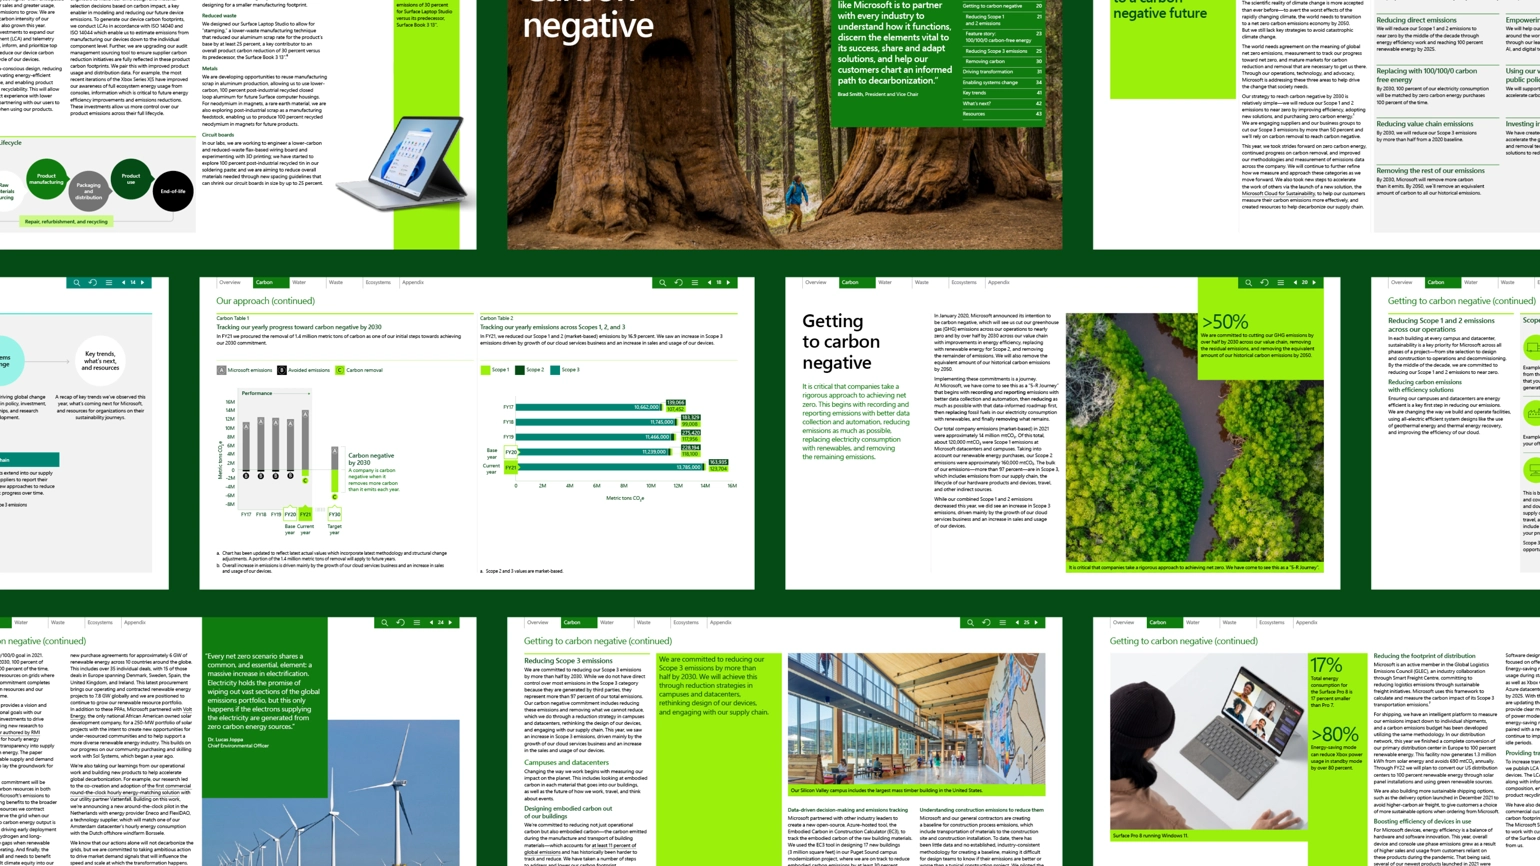 The example of Microsoft's report pages within the Sustainability report 